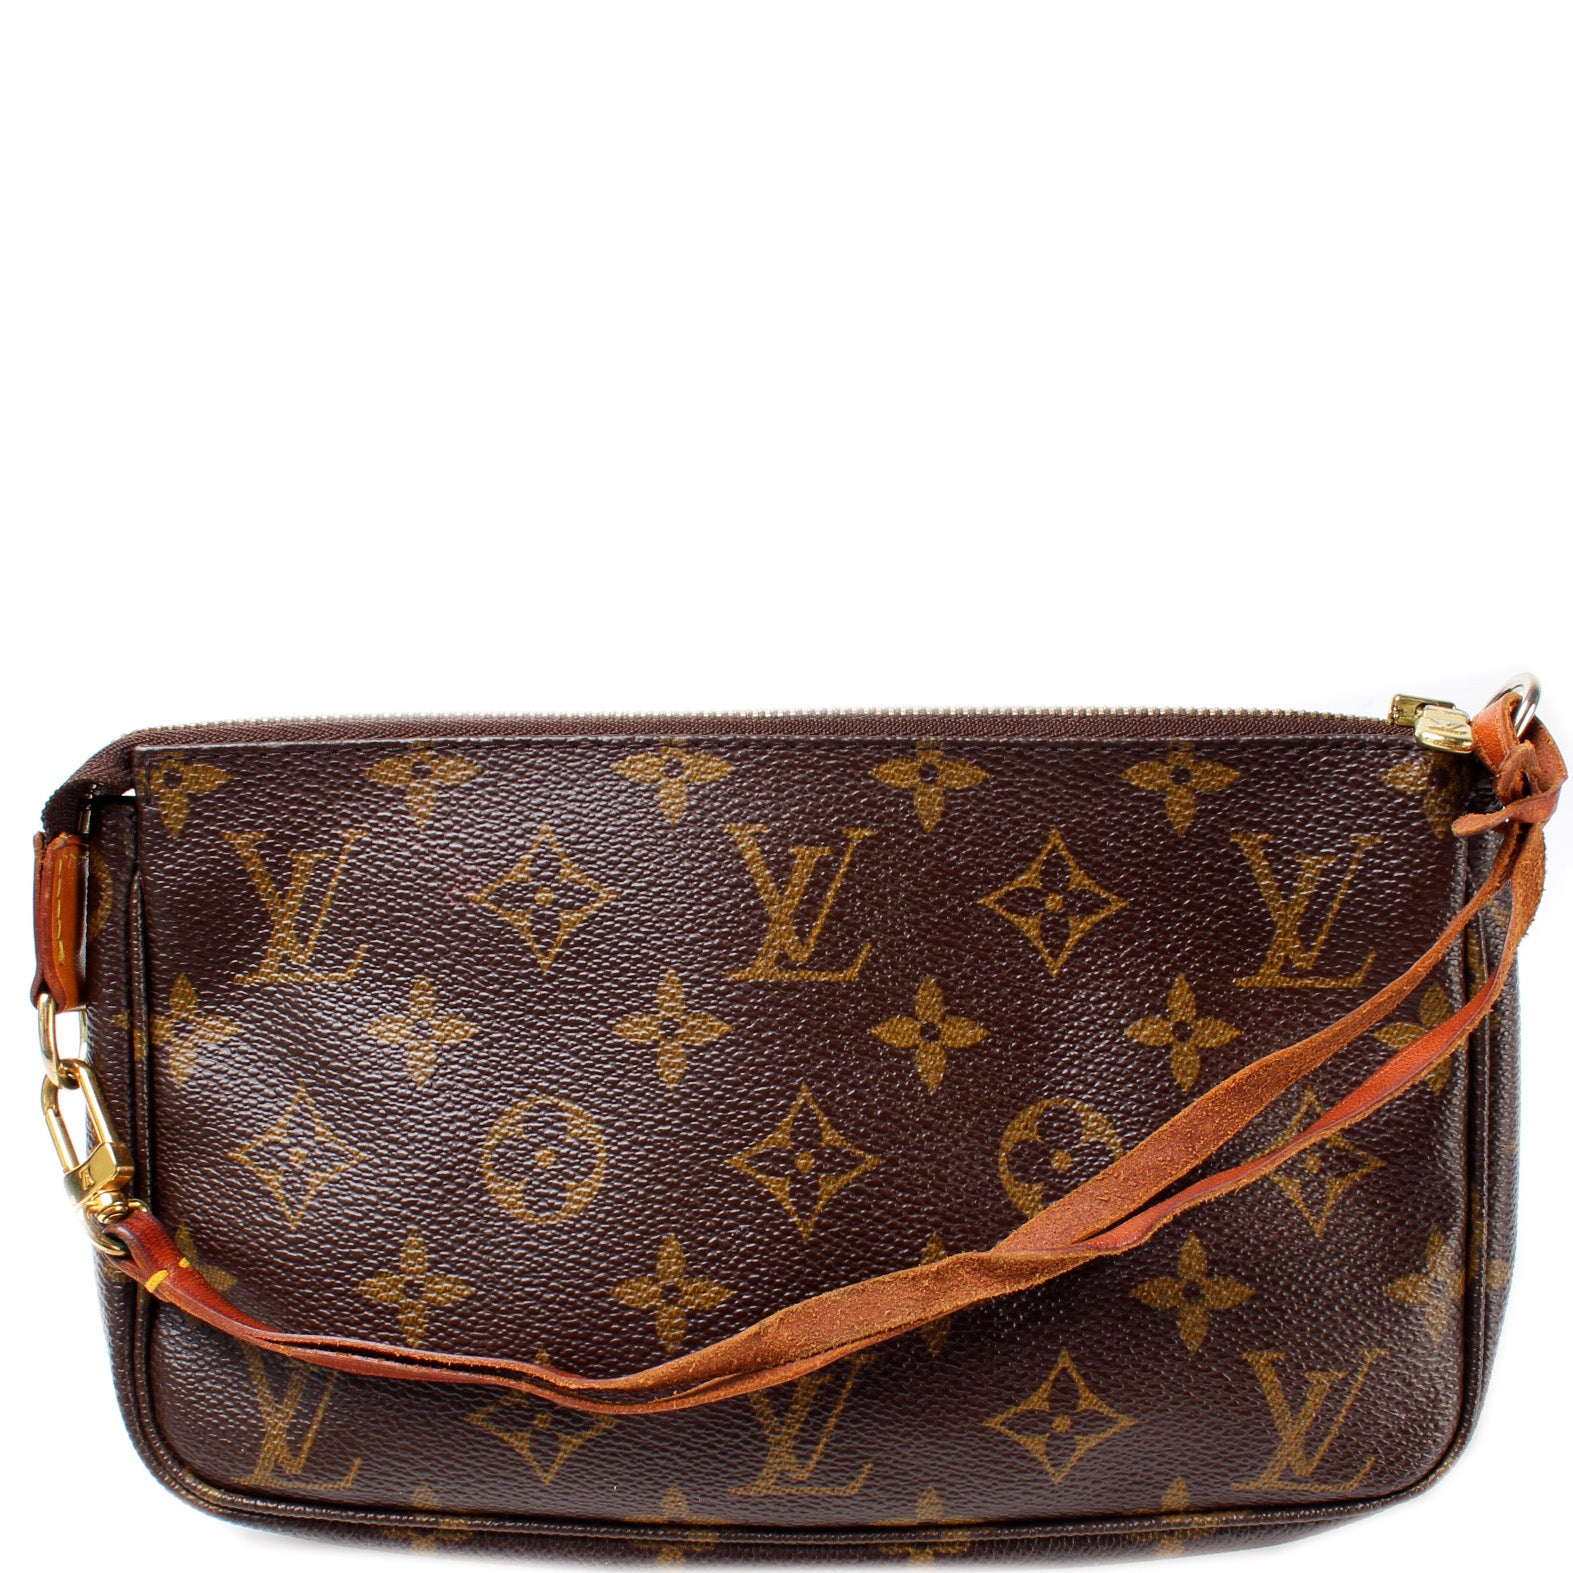 An Authenticator's Guide to a Real vs. Fake Louis Vuitton Pochette